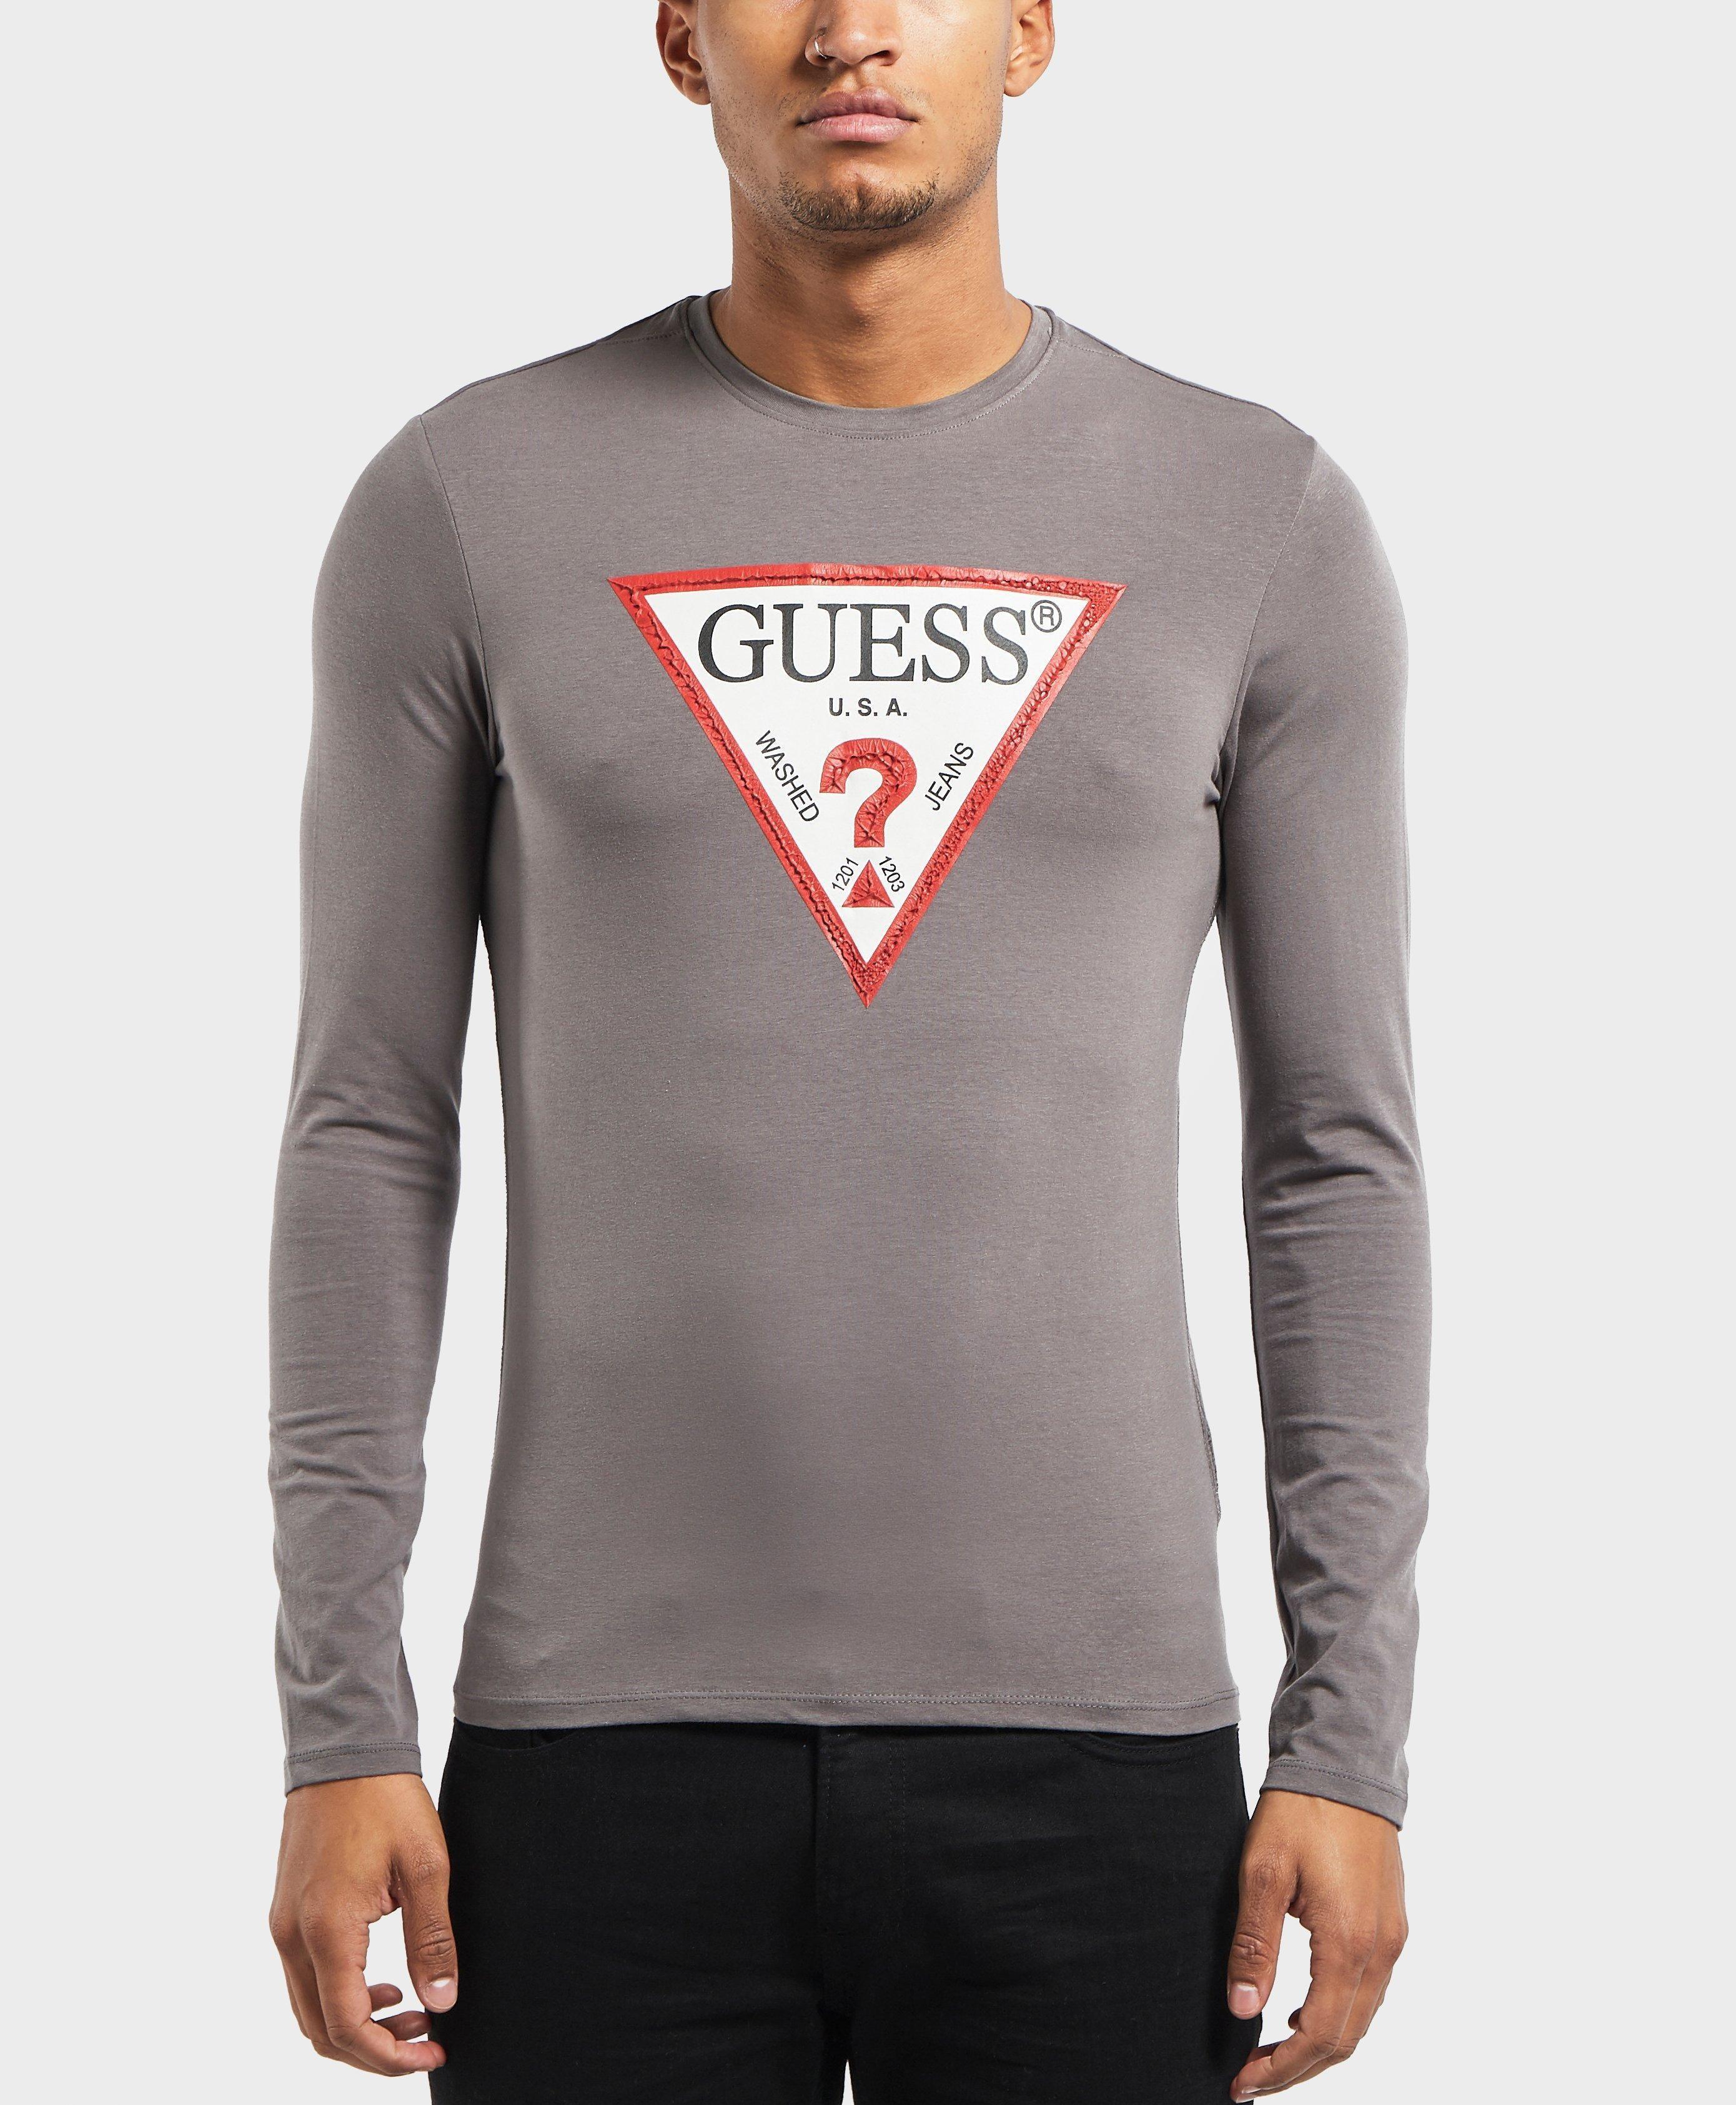 Gray Triangle Logo - Guess Triangle Logo Long Sleeve T-shirt in Gray for Men - Lyst